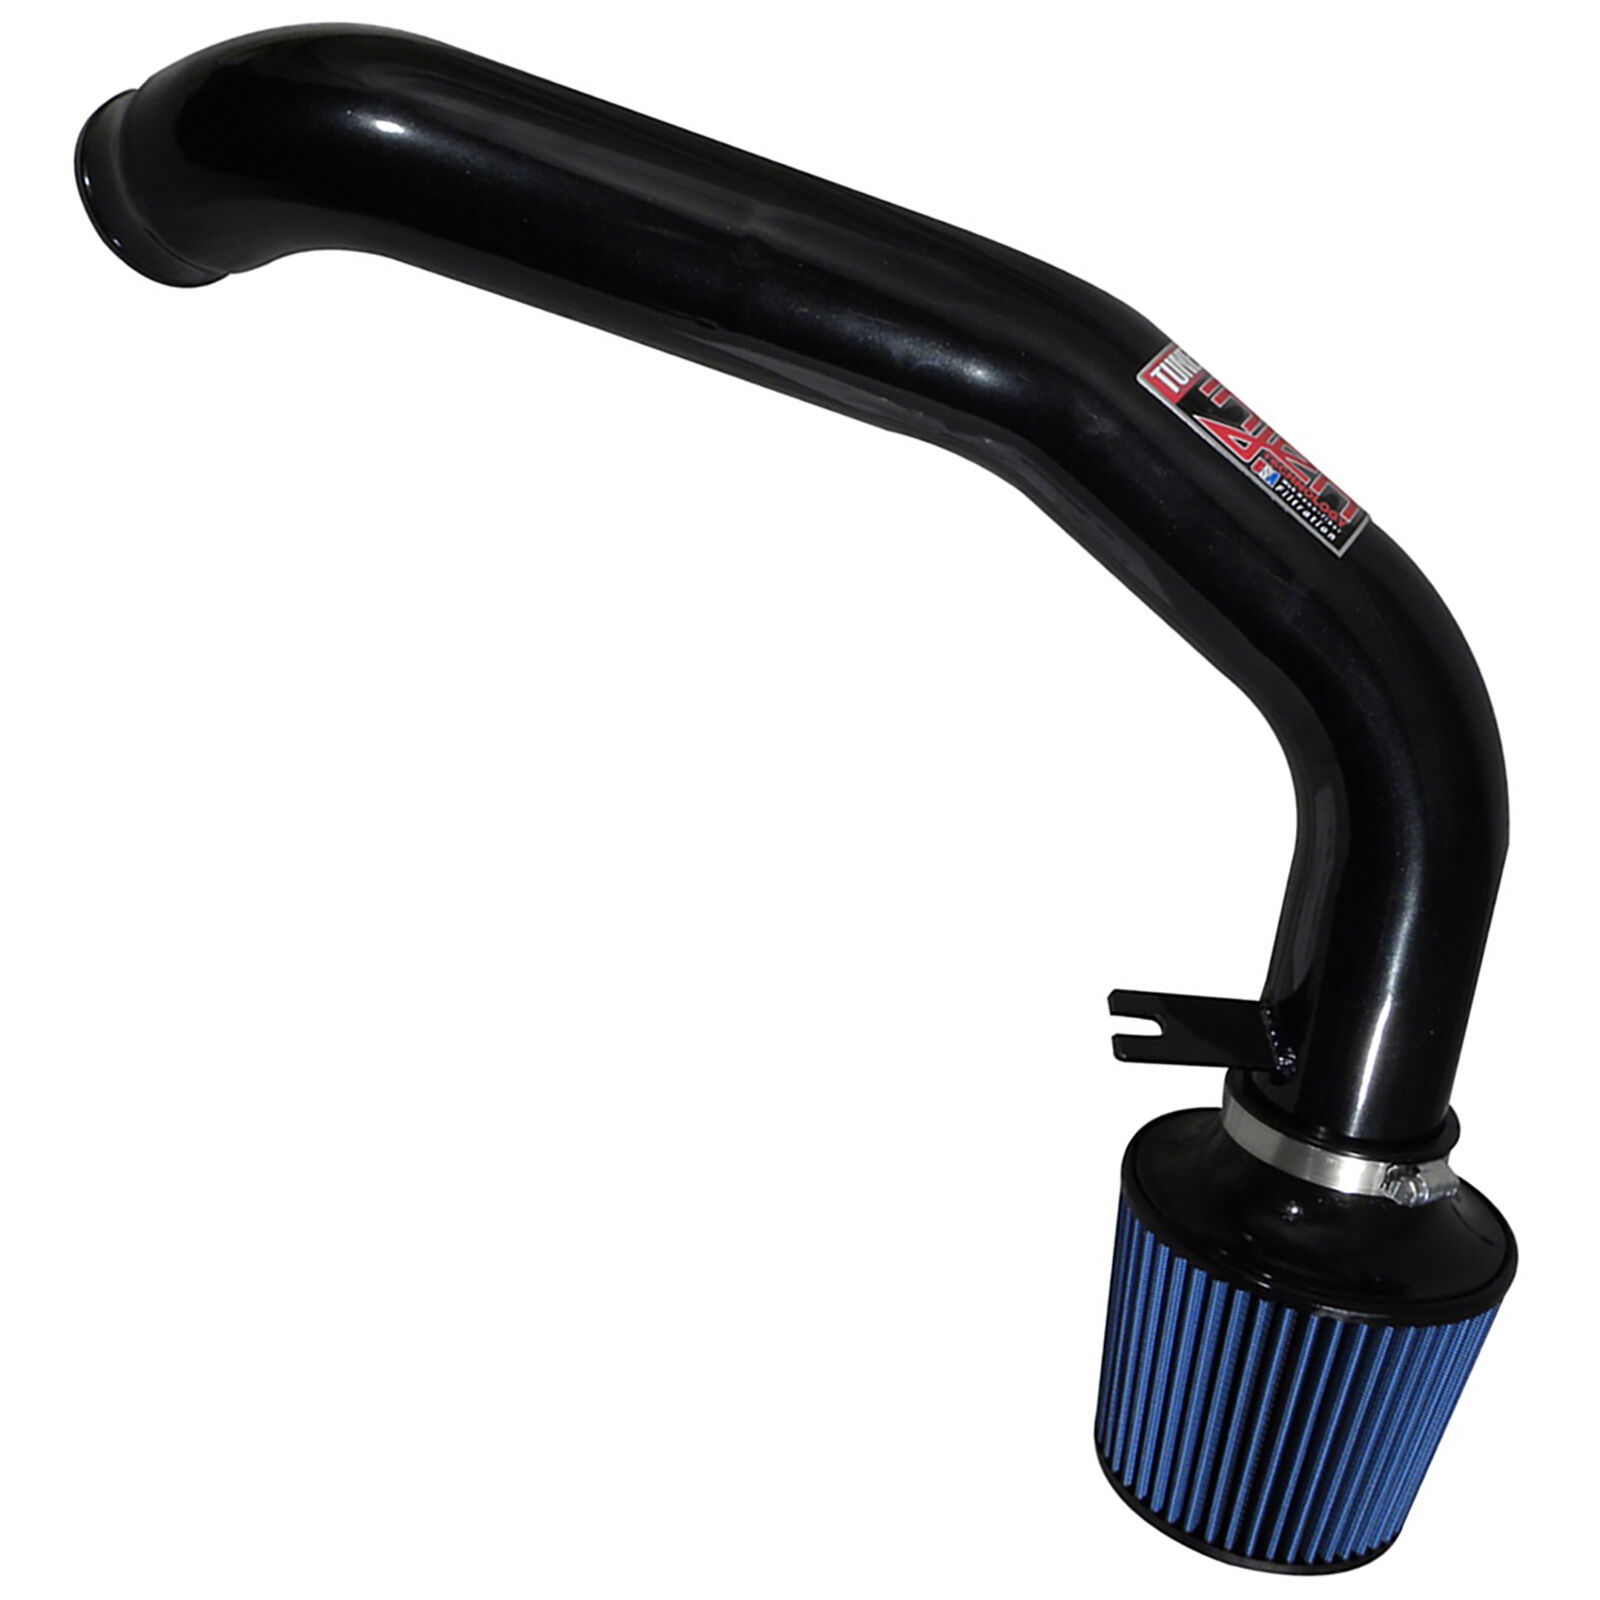 Injen SP9080BLK Aluminum Cold Air Intake for 2004-06 Volvo S40 / 2007-10 C30 2.5